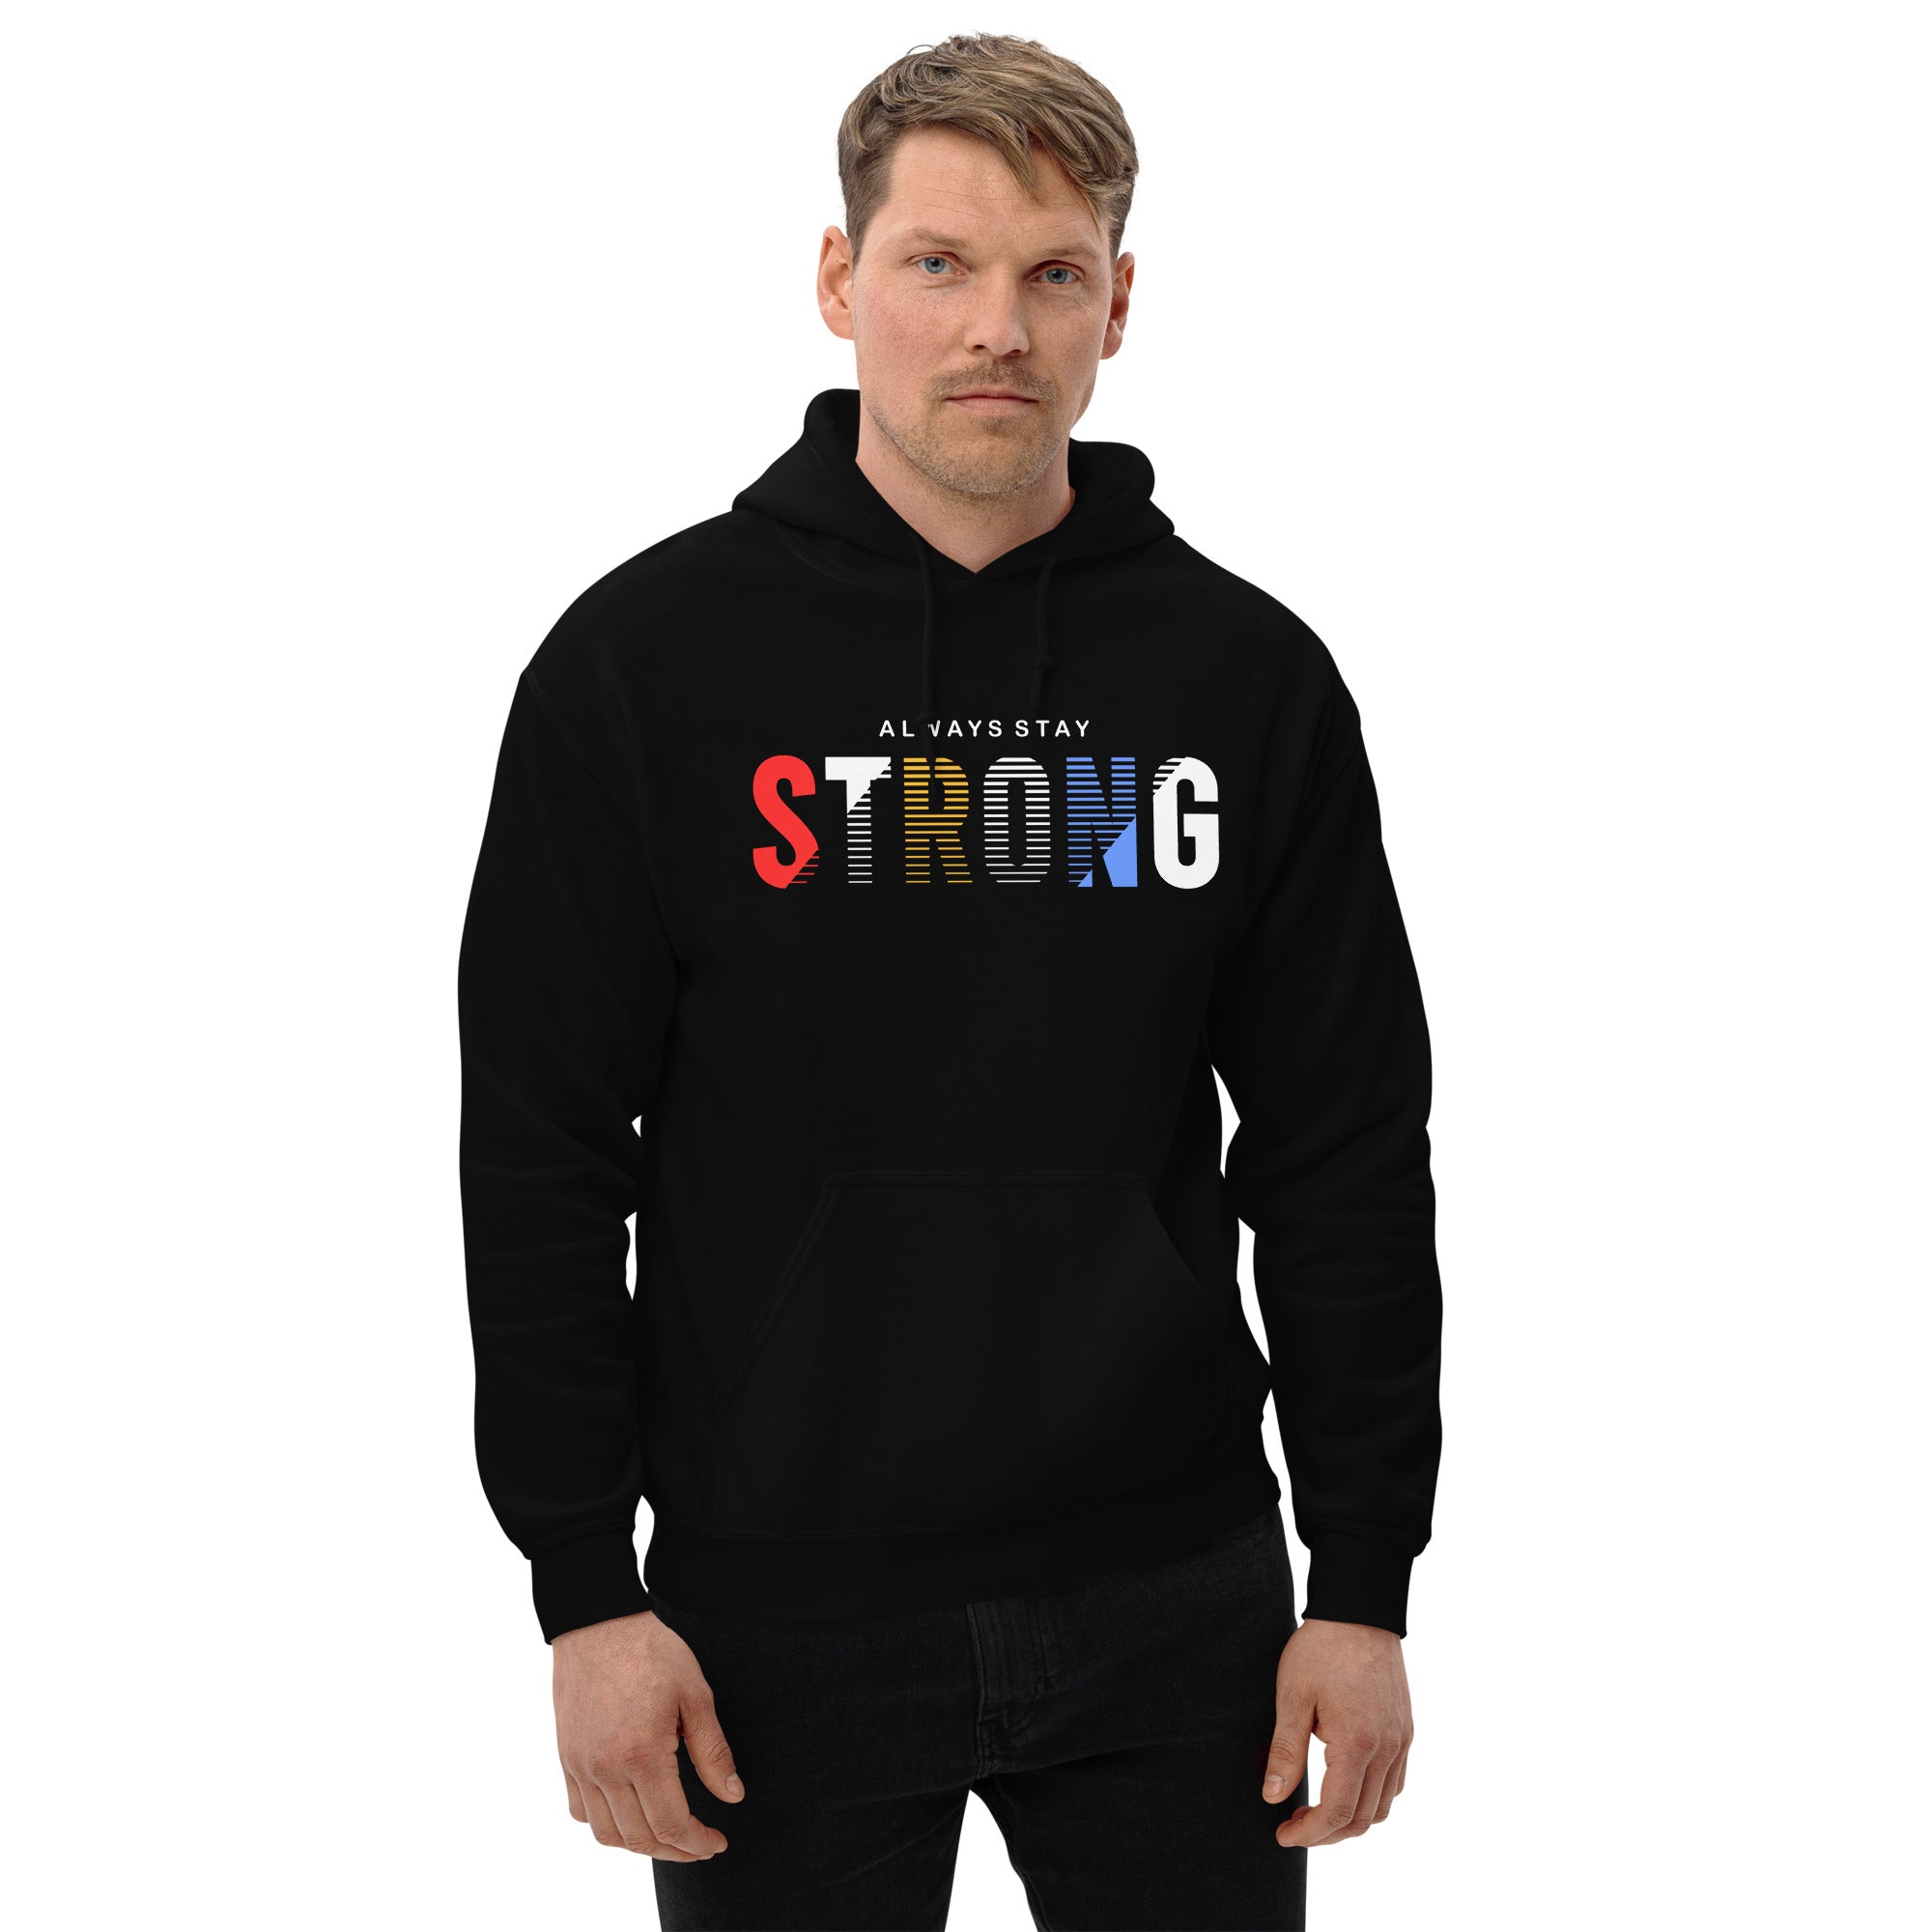 Always Stay Strong - Unisex Hoodie